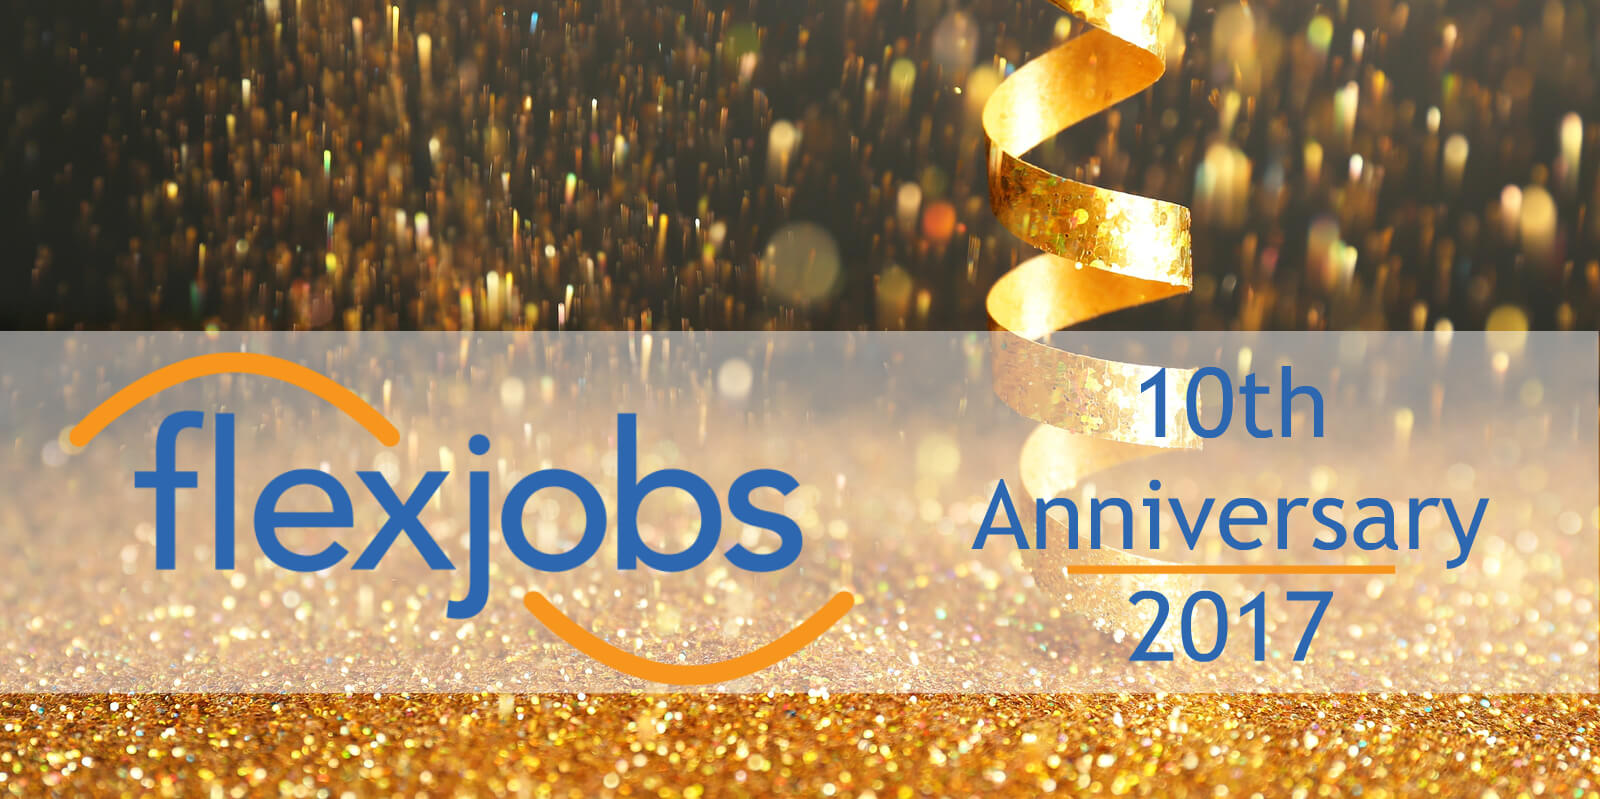 For FlexJobs 10th anniversary, we